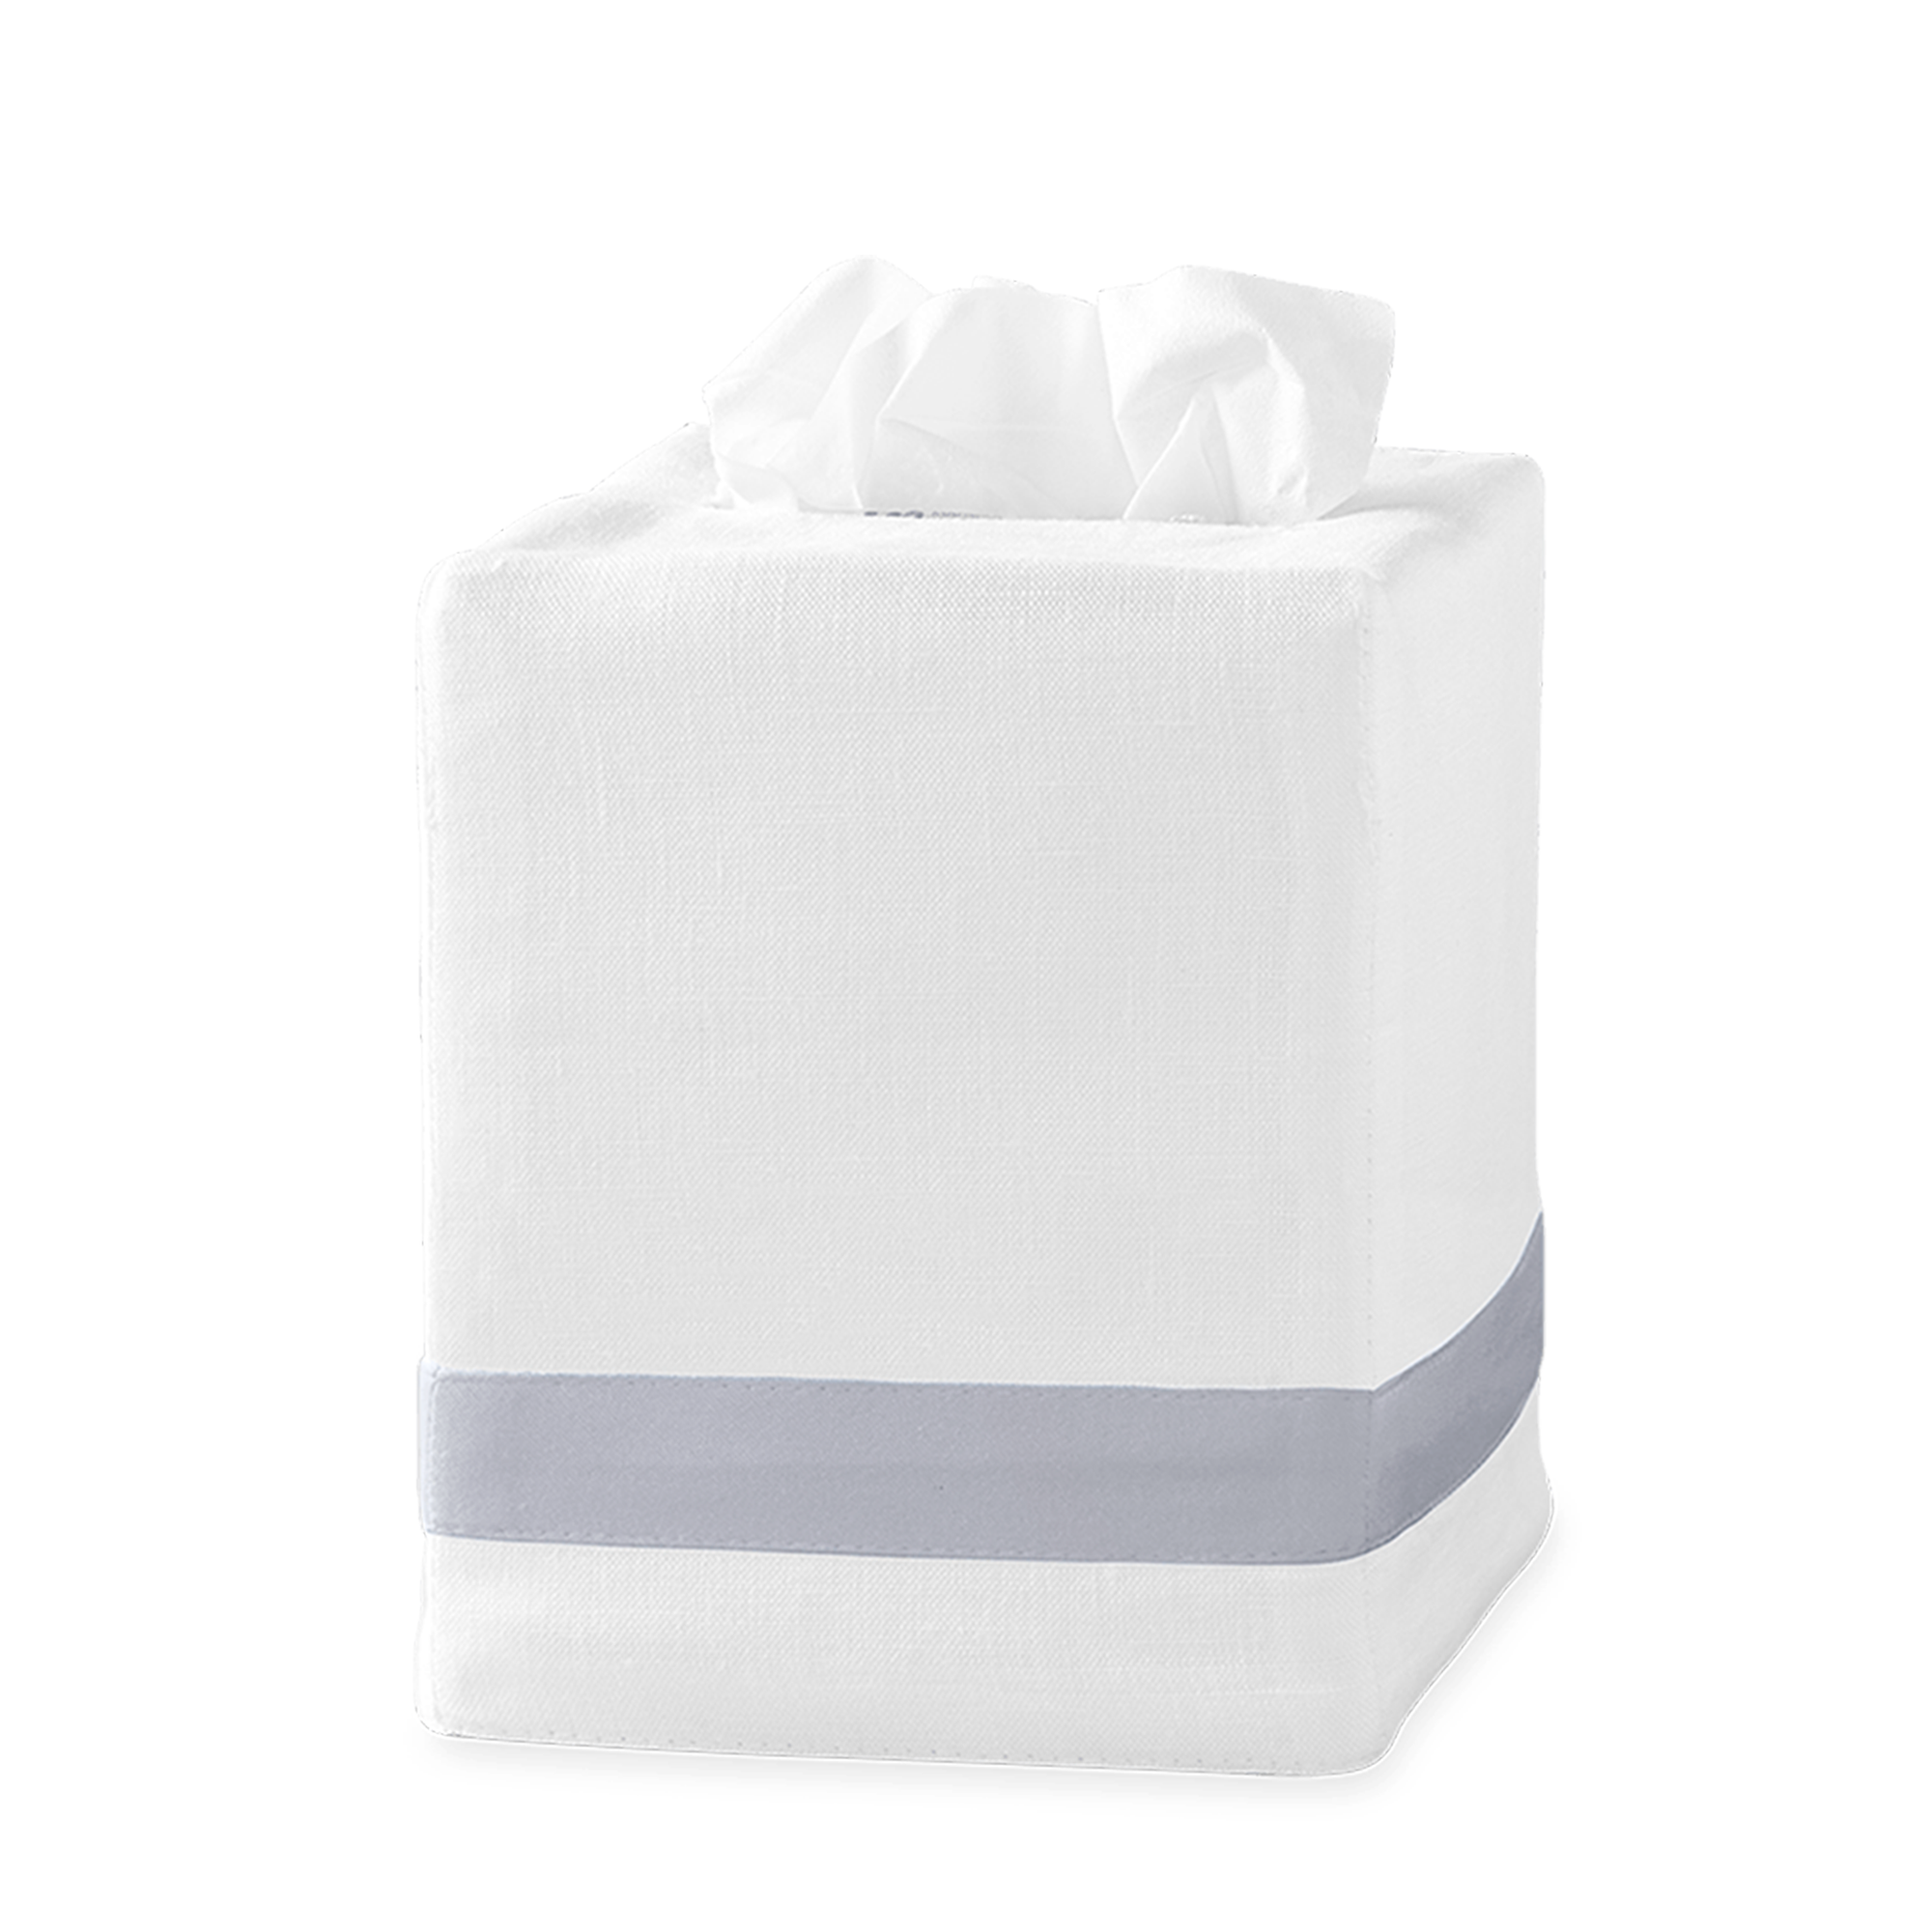 Silo Image of Matouk Lowell Tissue Box Cover in Color Elephant